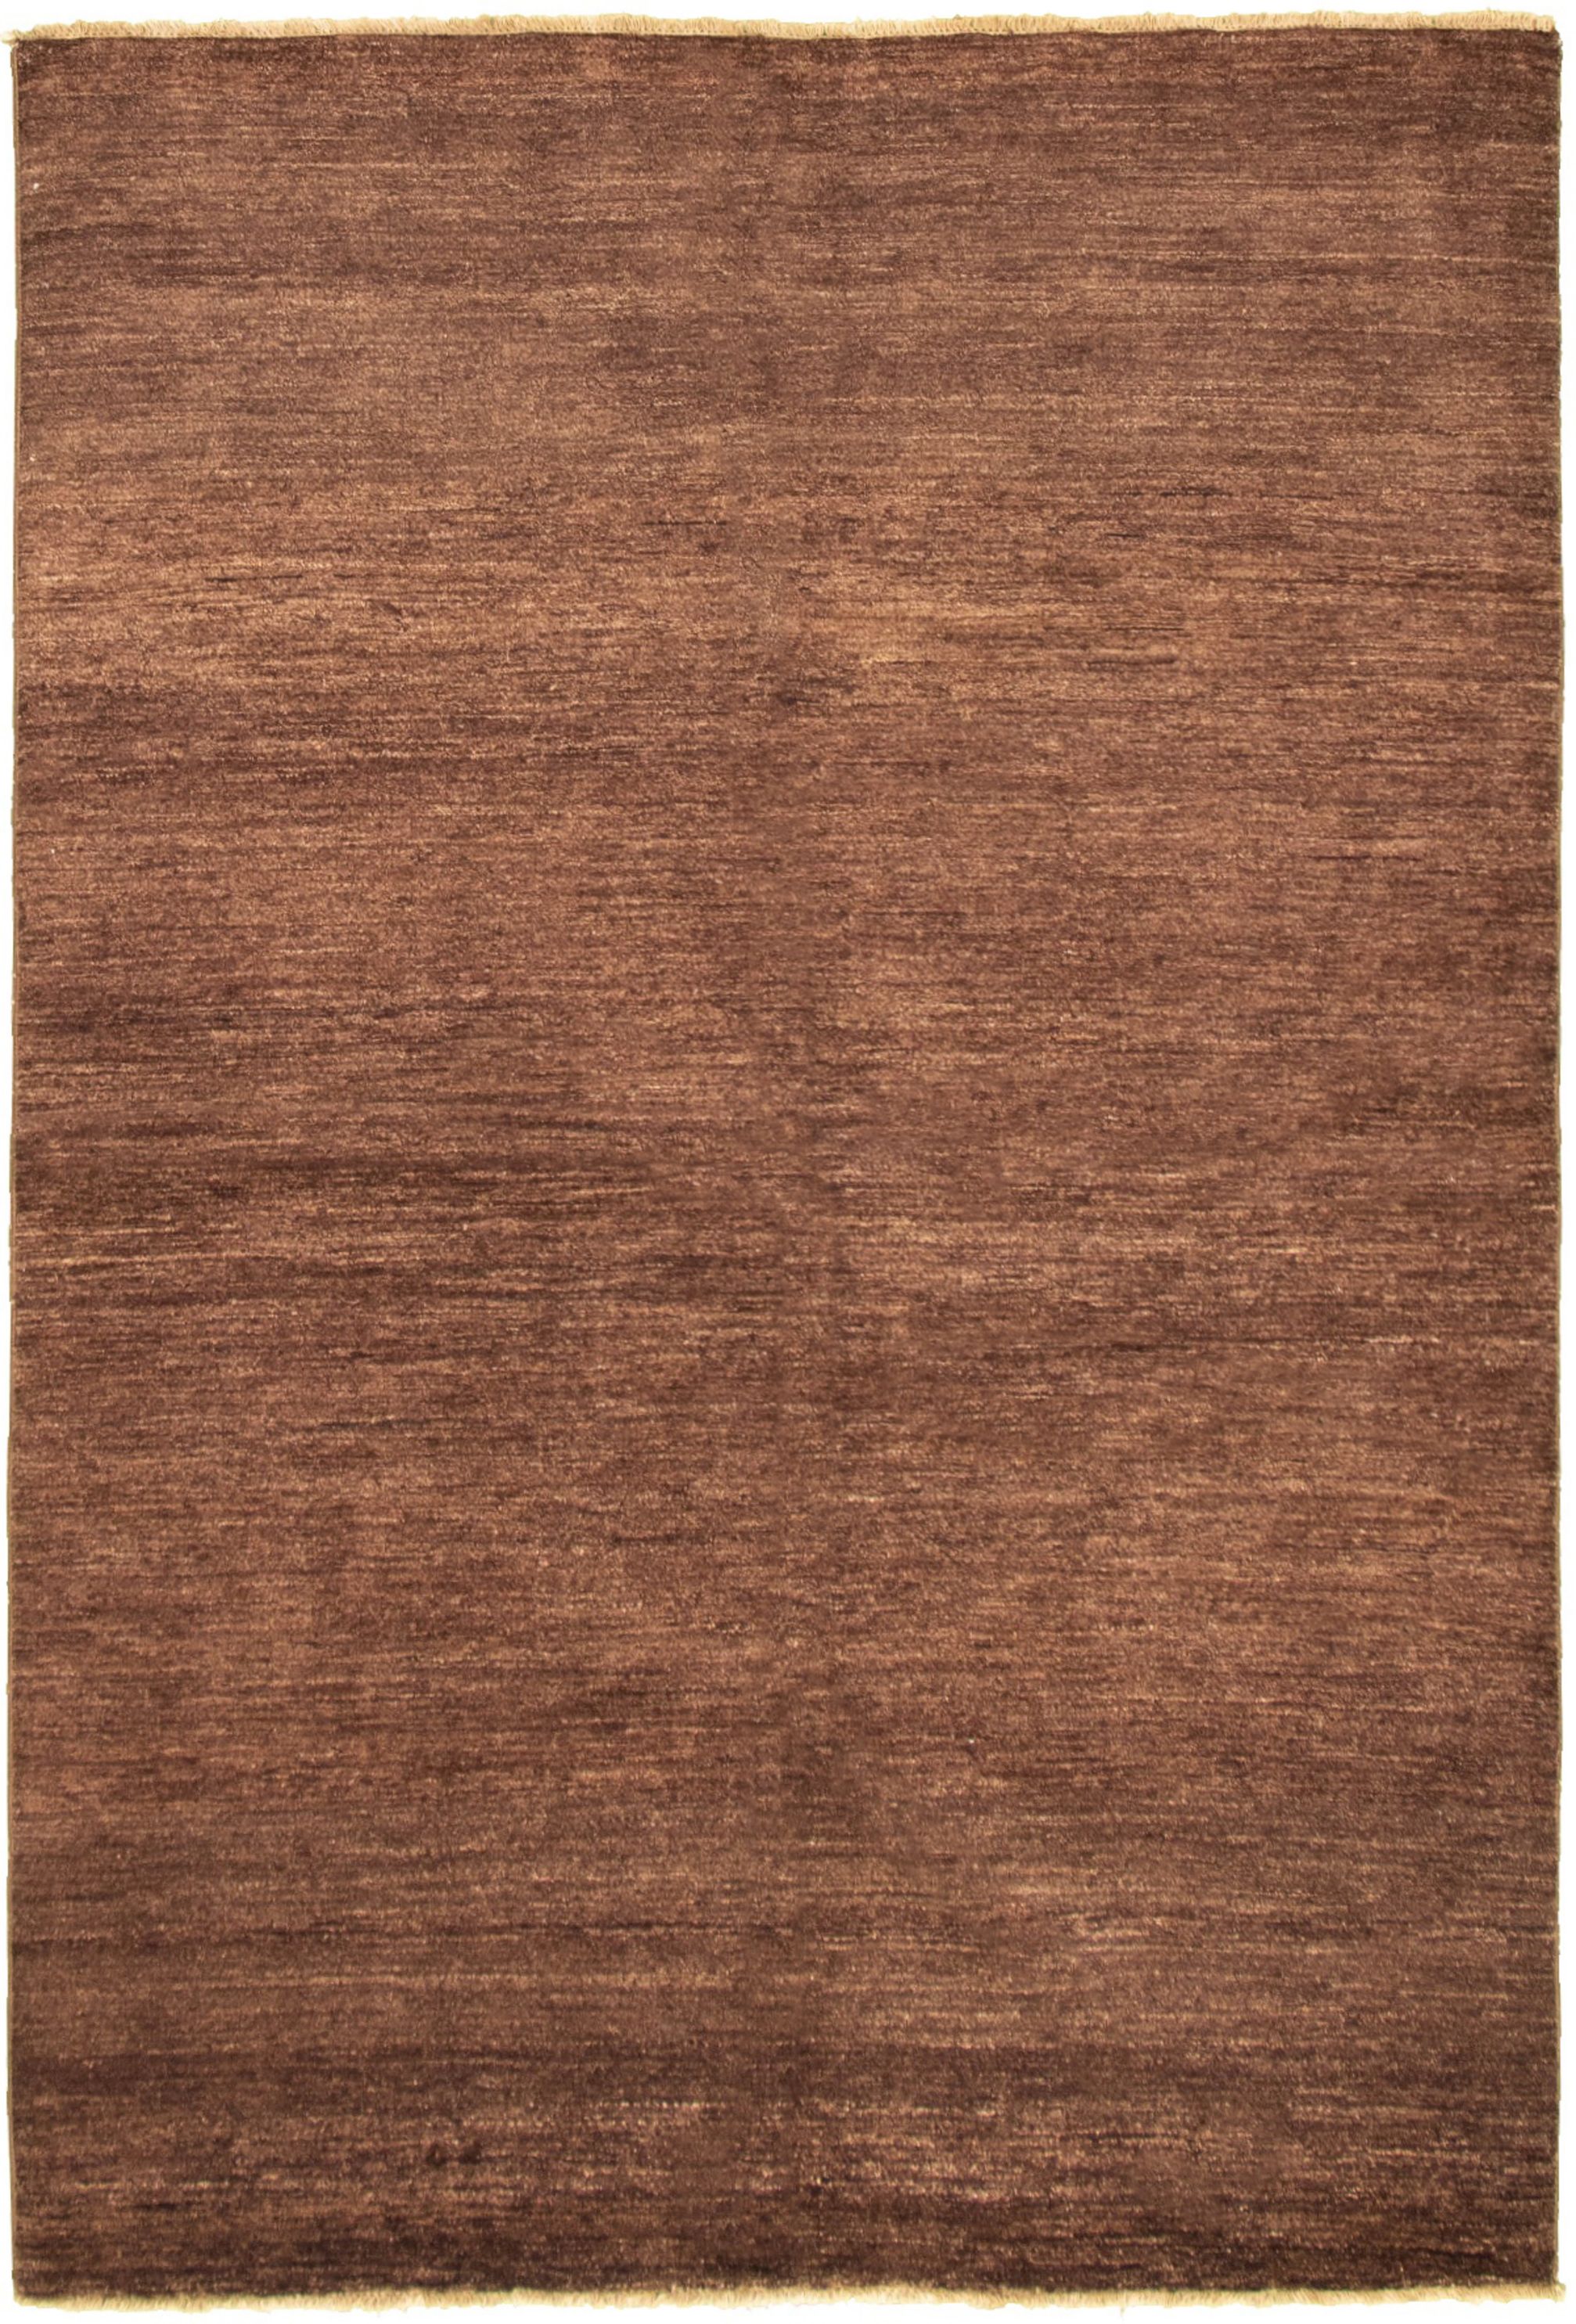 Hand-knotted Chobi Twisted Dark Brown Wool Rug 5'7" x 8'2" Size: 5'7" x 8'2"  